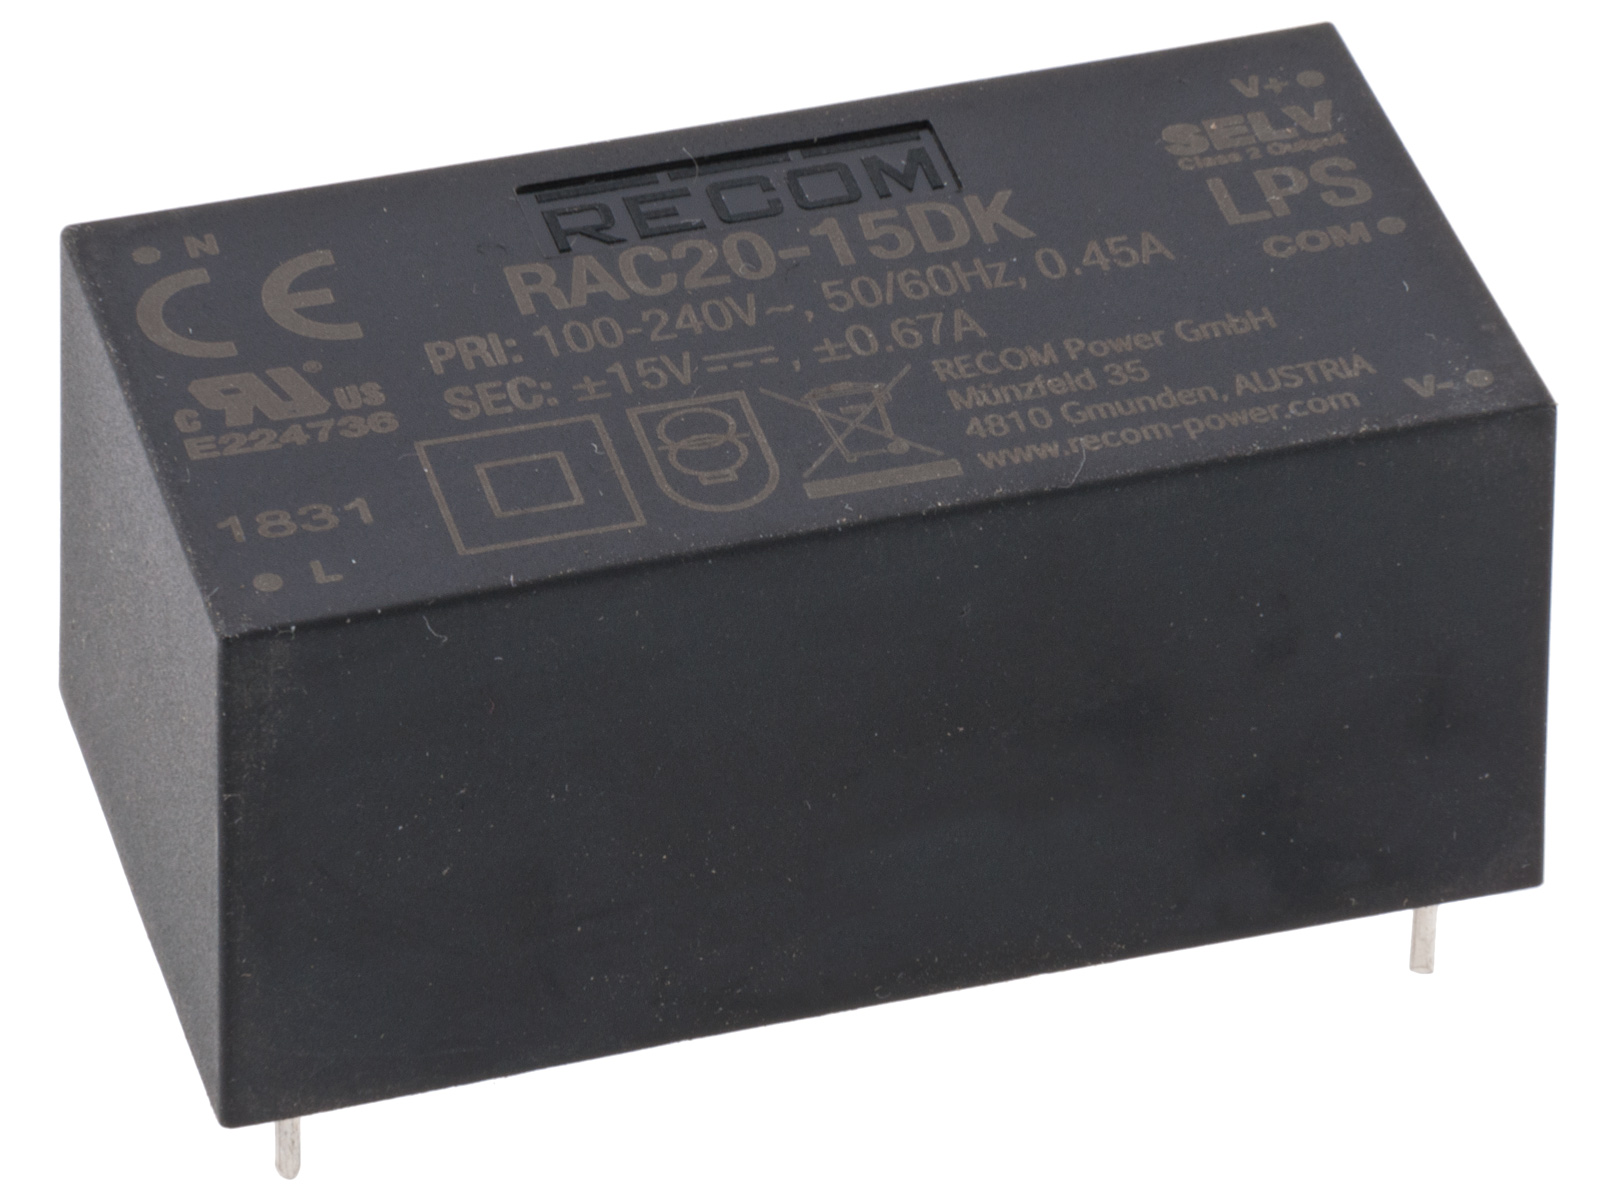 Switched power supply 20W ±15V @ electrokit